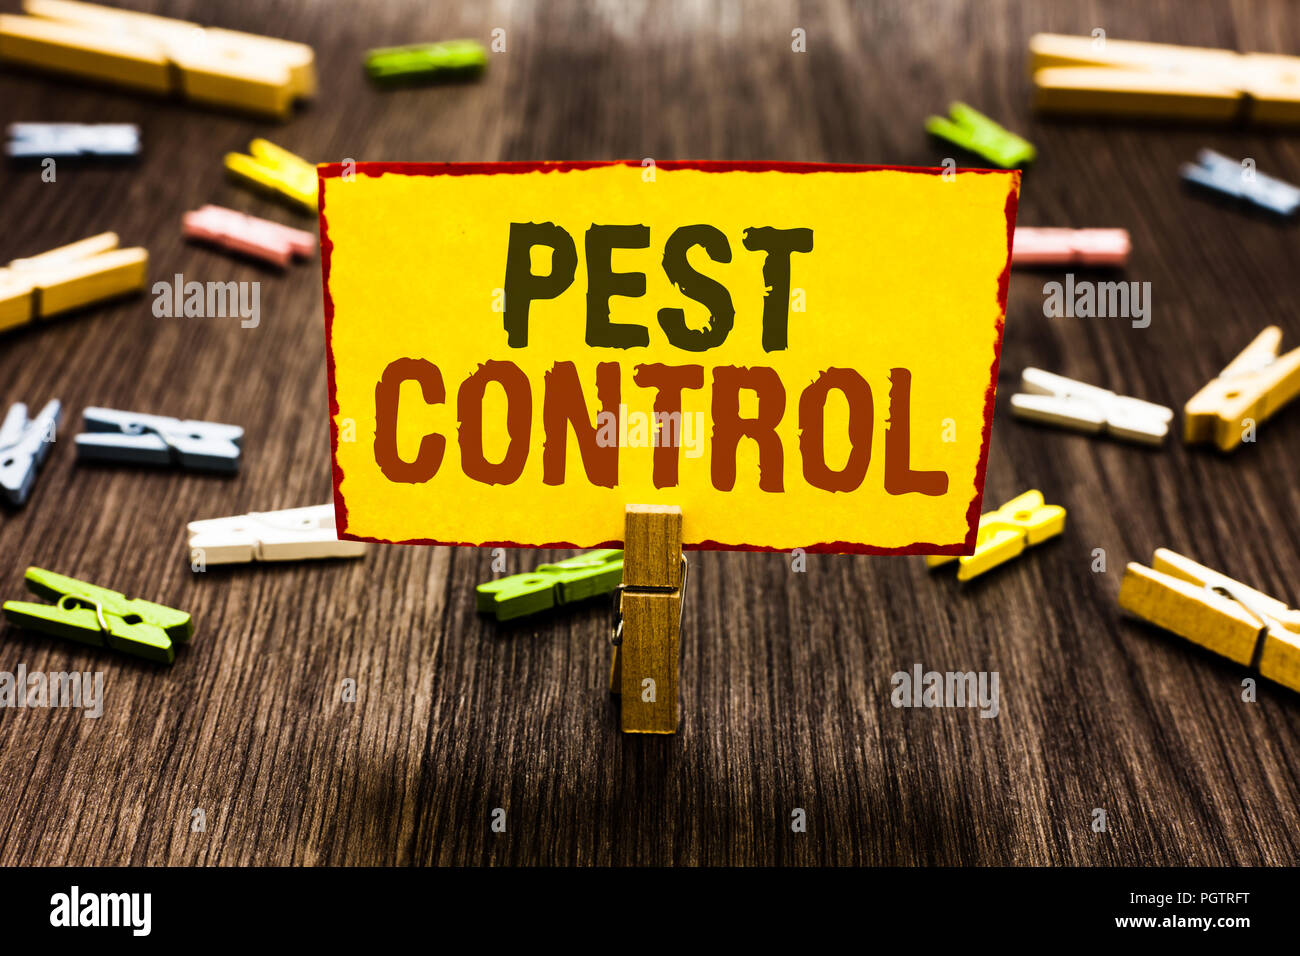 pest-control-meaning-astonishingceiyrs